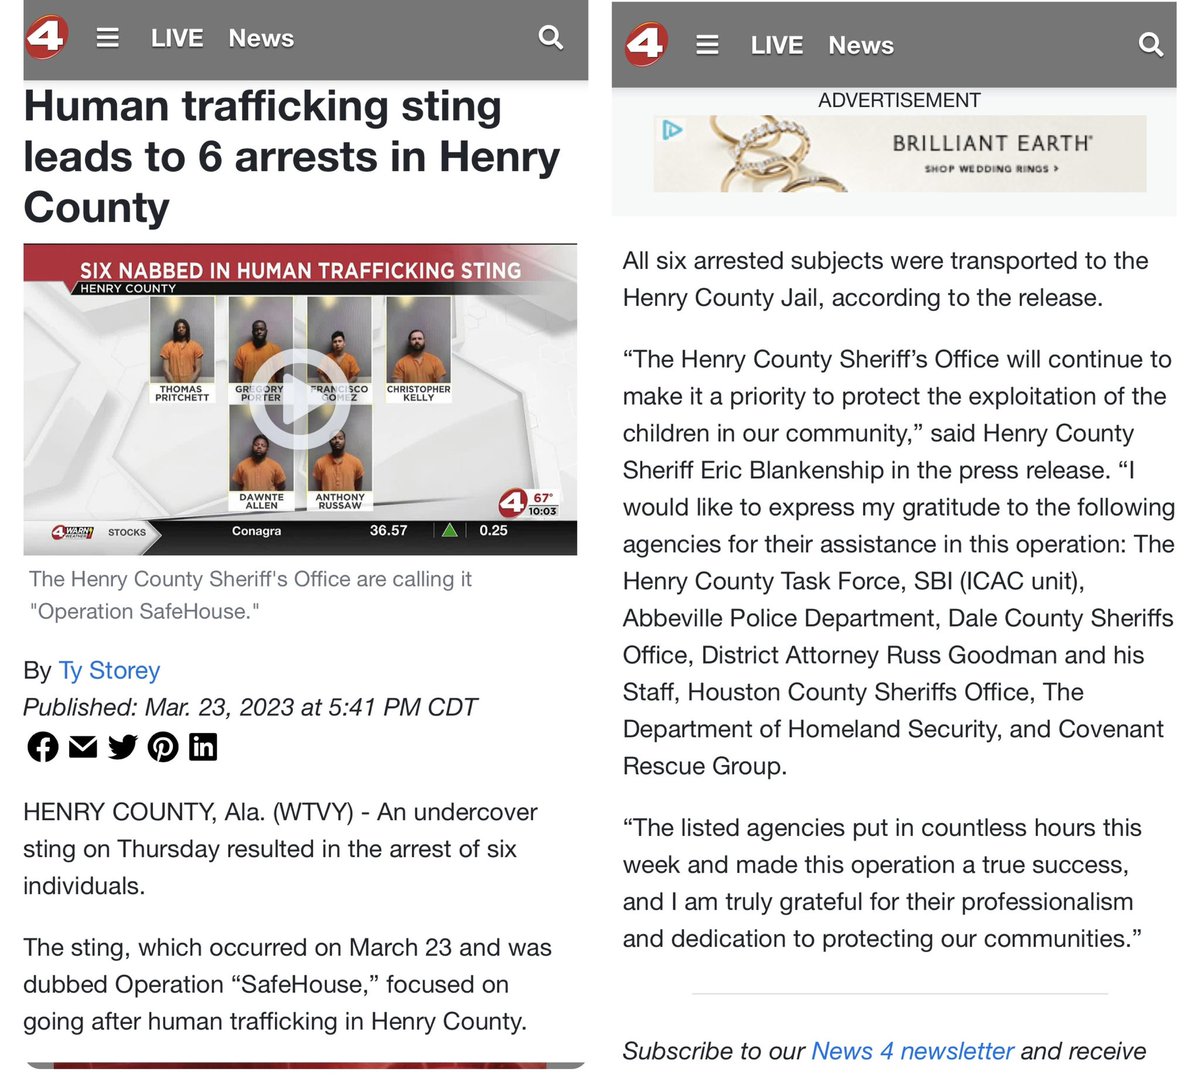 Always good getting bad guys off the street.Last week we worked in conjunction with local LE in Henry County Alabama to assist in the arrest of 6 individuals. It was a successful operation. #humantrafficking #sextrafficking #henrycounty #covenantrescuegroup #crg #crushevil #endit